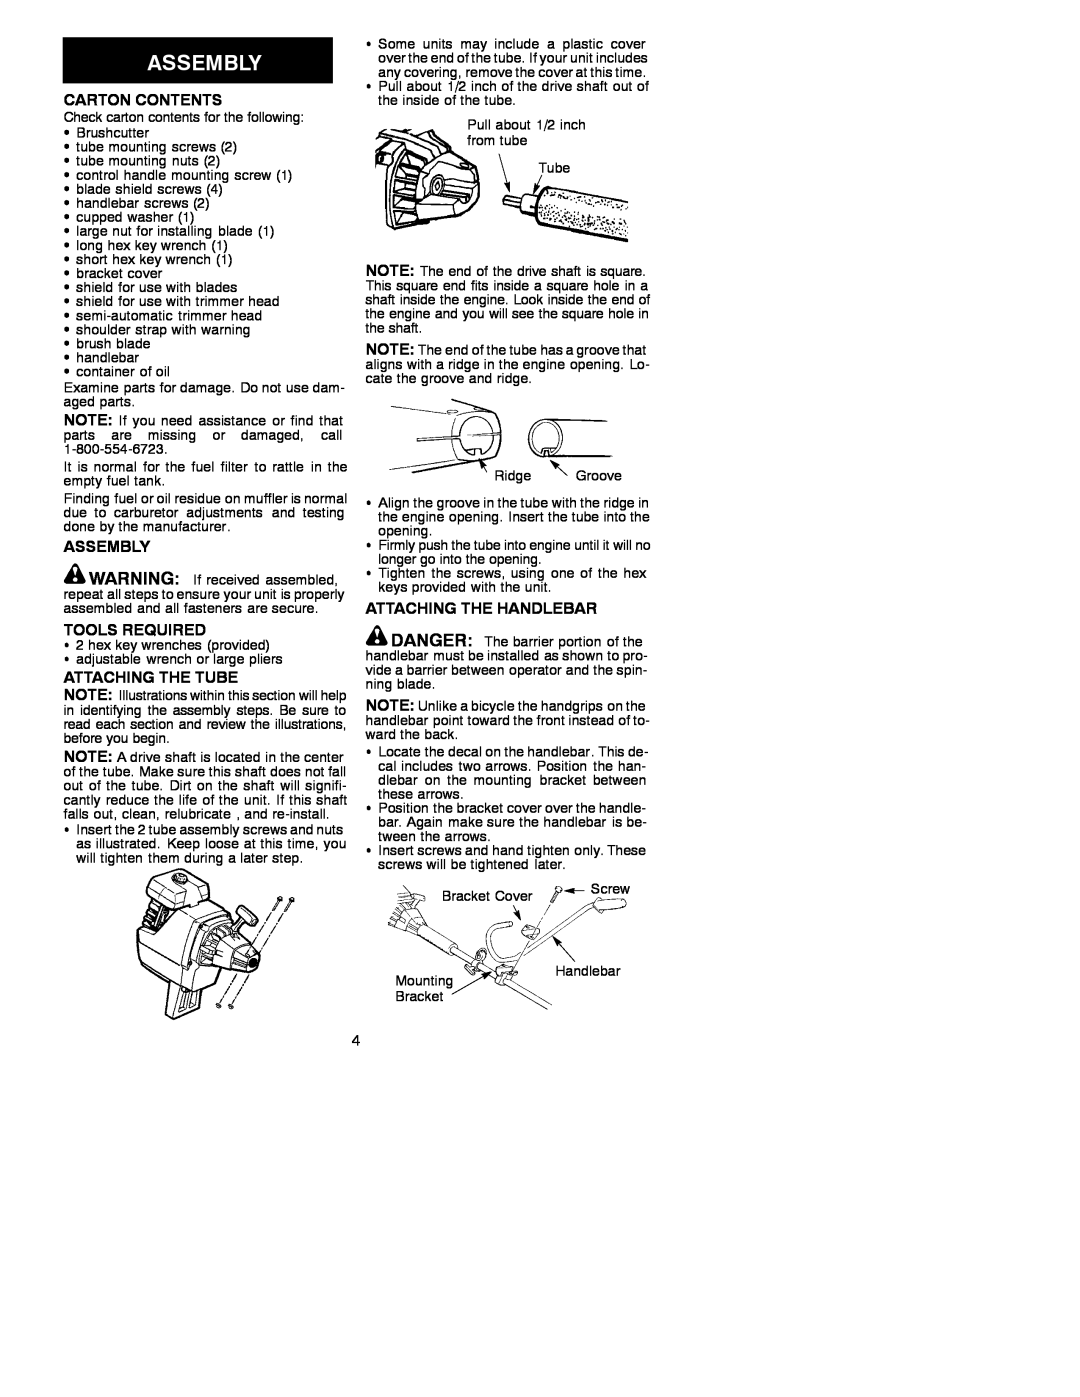 Weed Eater BC3100, 530087645 manual Carton Contents, Assembly, Tools Required, Attaching The Tube, Attaching The Handlebar 